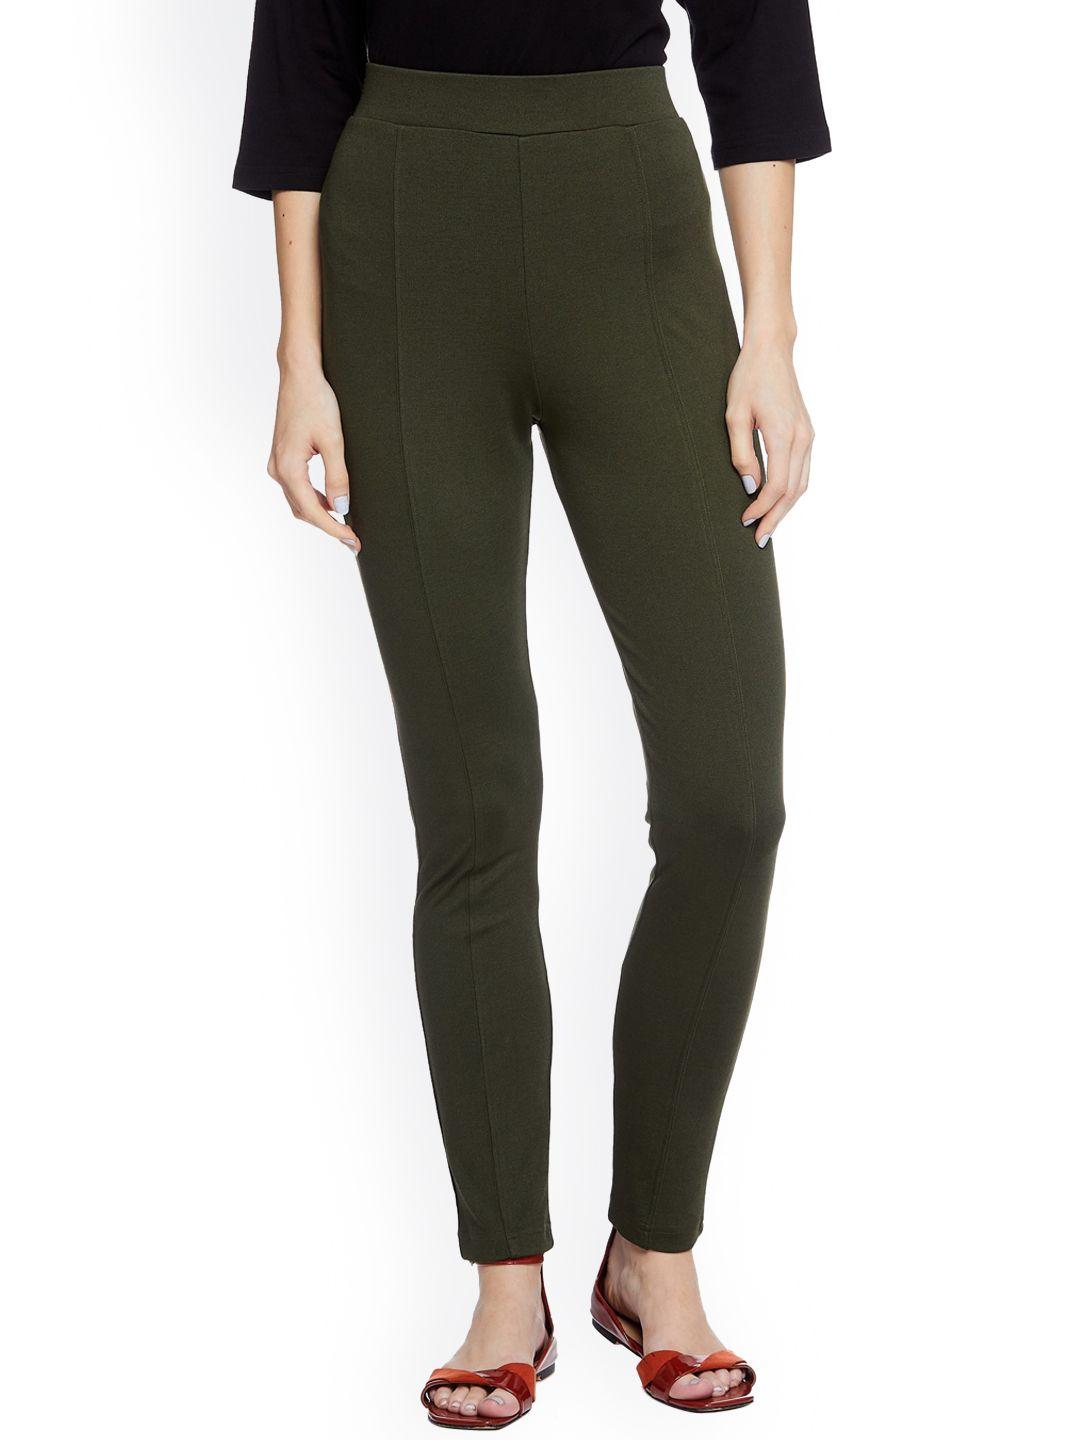 unmade-women-high-rise-slim-fit-trousers